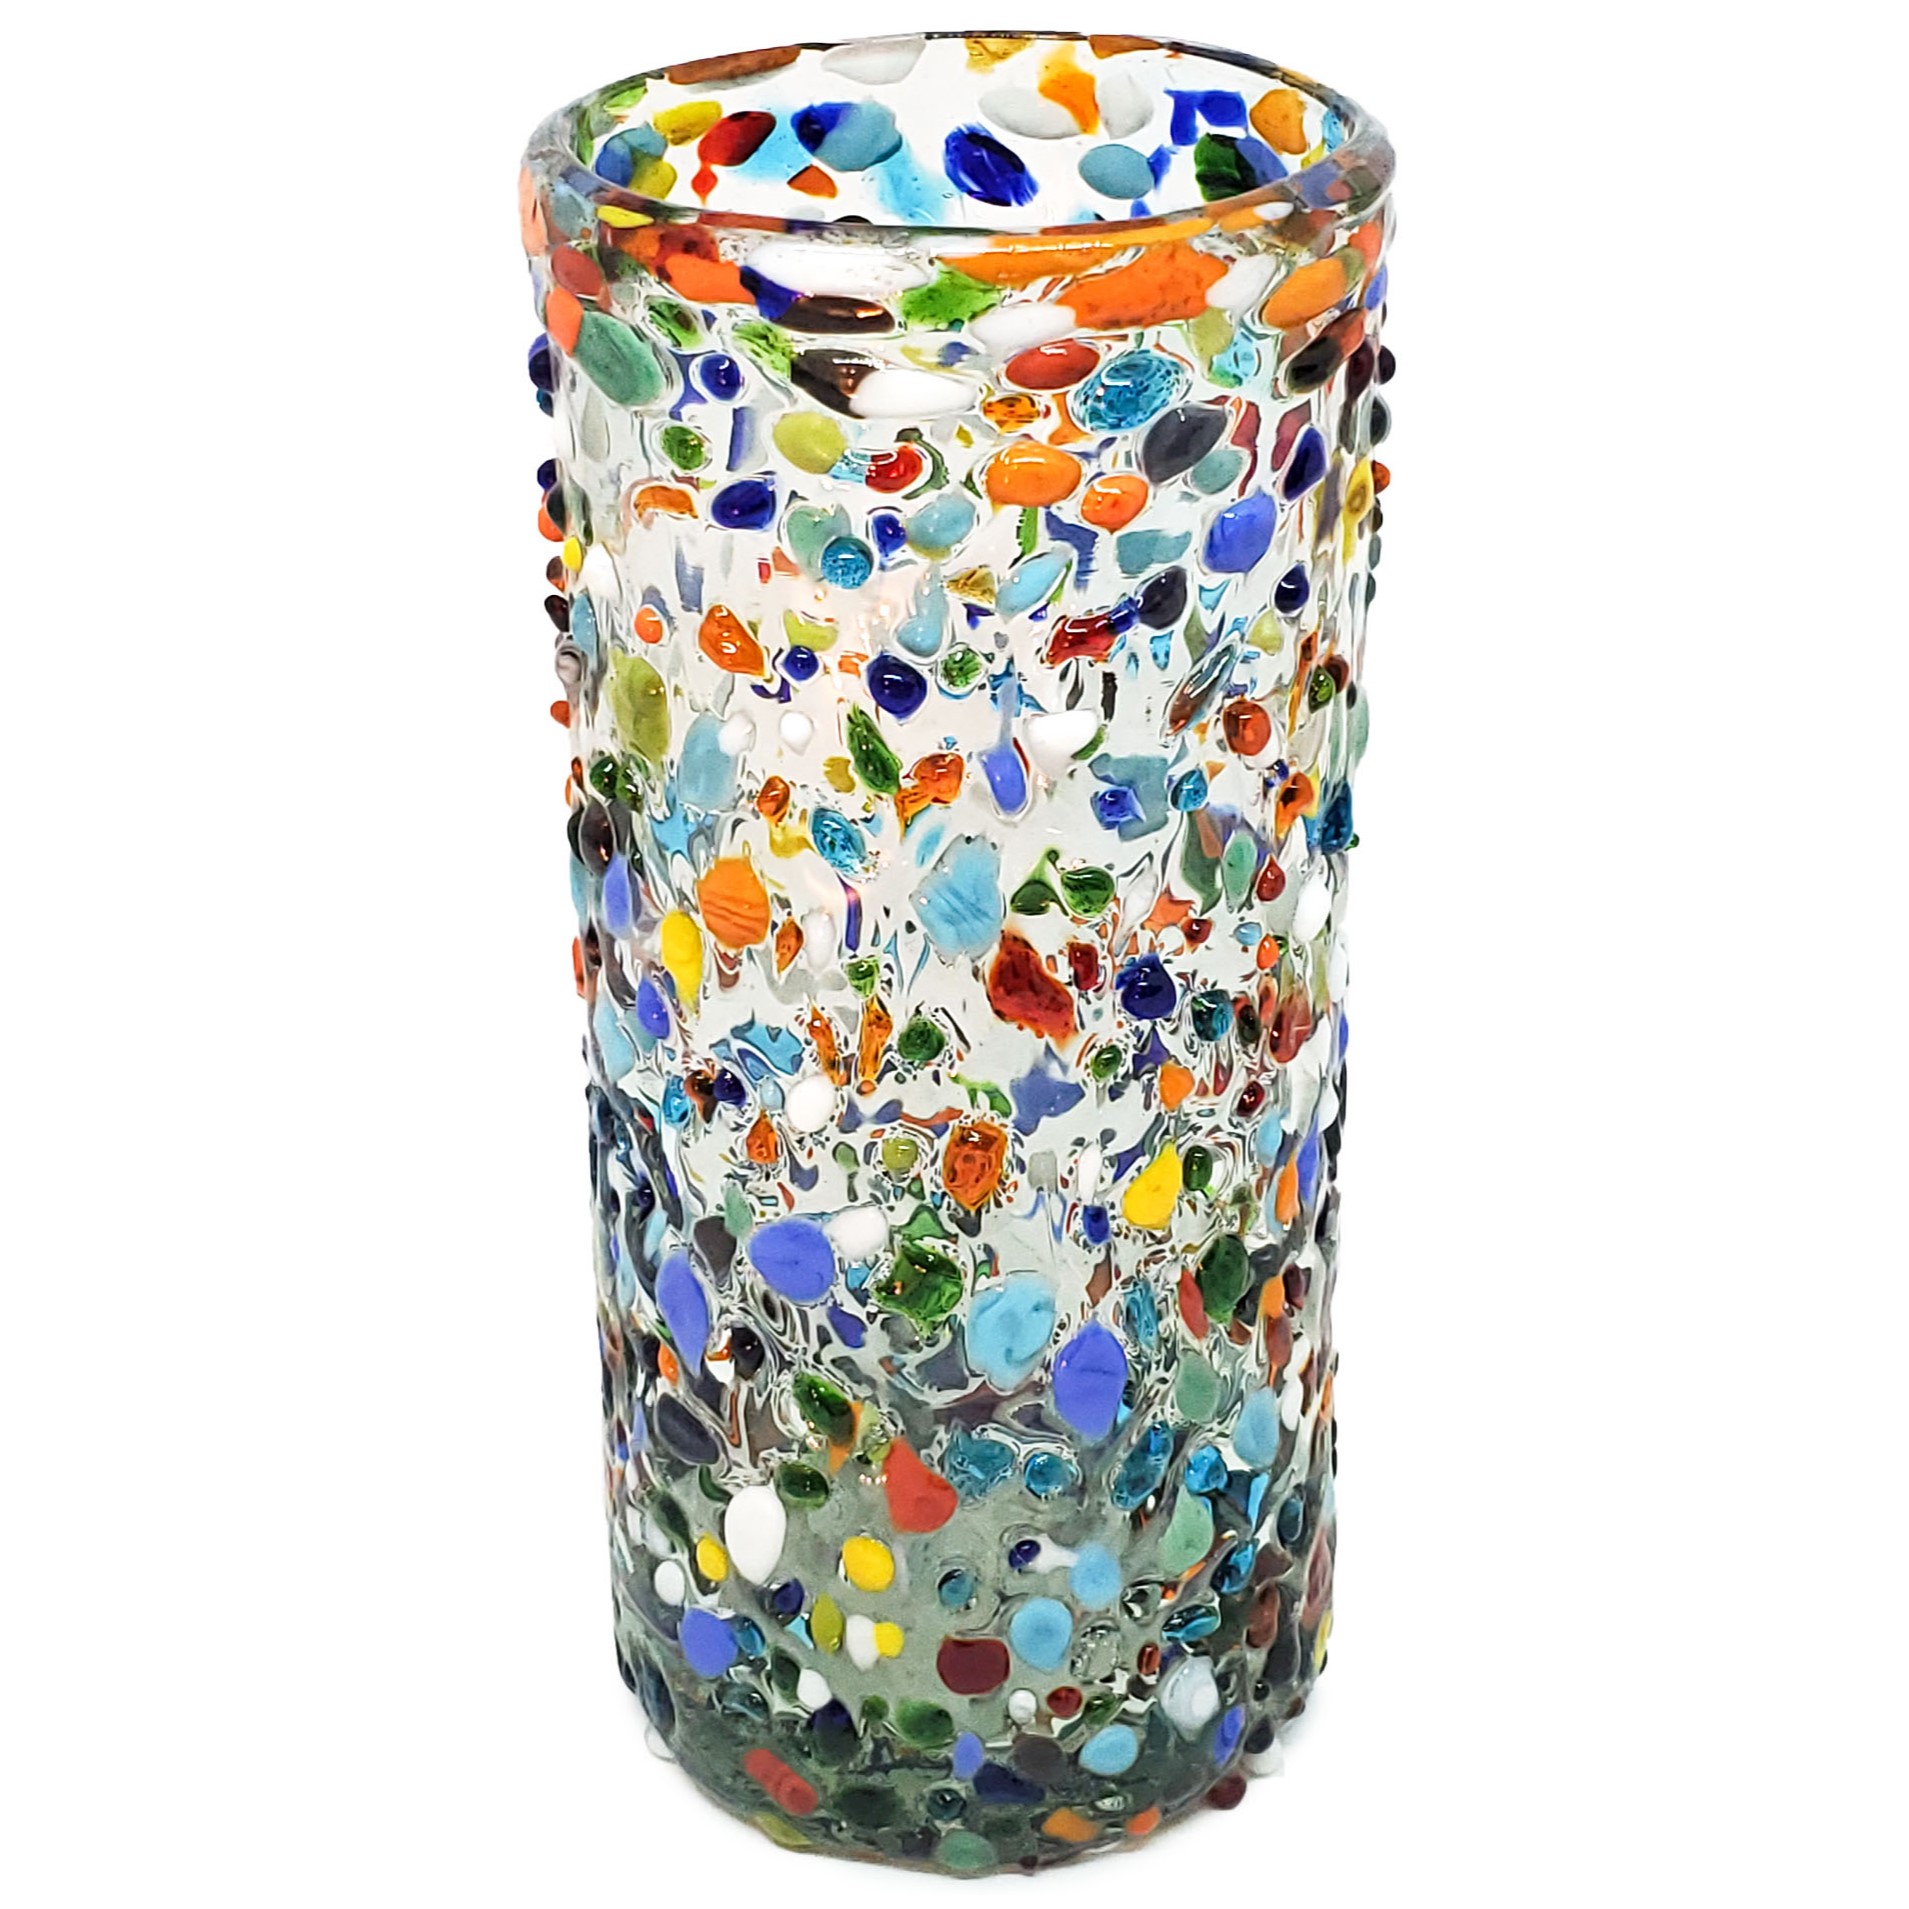 Confetti Glassware / Confetti Rocks 20 oz Tall Iced Tea Glasses (set of 6) / Let the spring come into your home with this colorful set of glasses. The multicolor glass rocks decoration makes them a standout in any place.